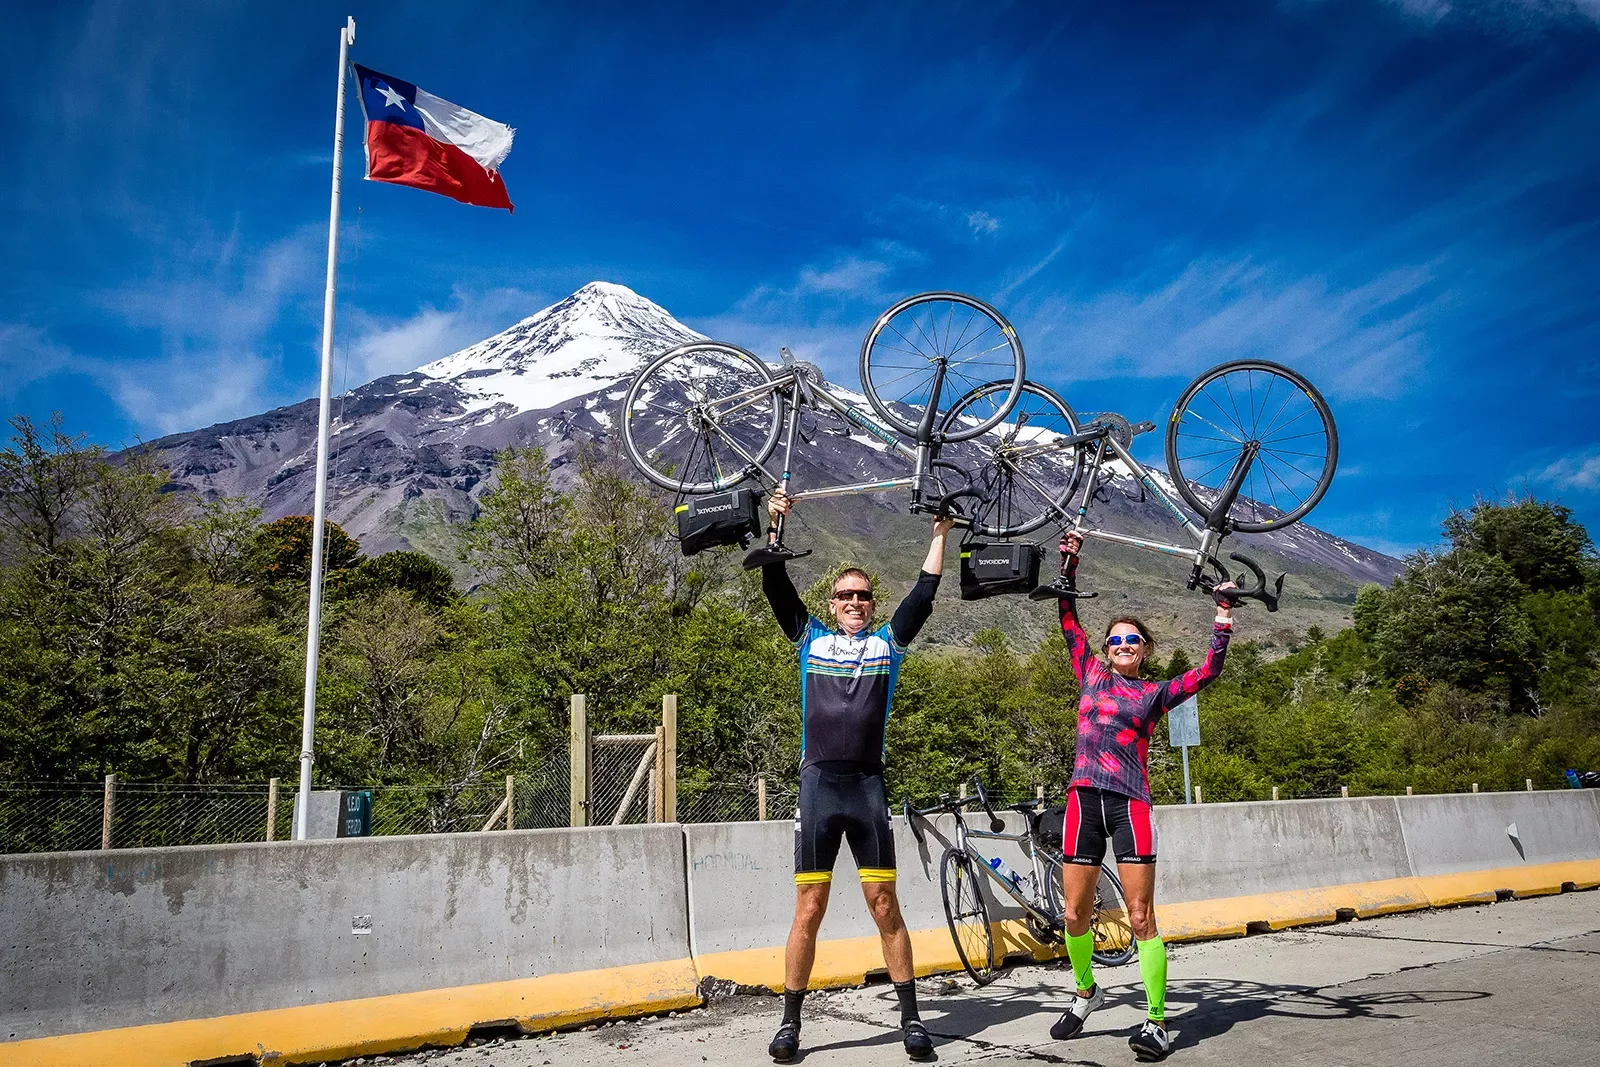 Two guests on road, holding bikes over head, Chilean flag, mountain behind them.